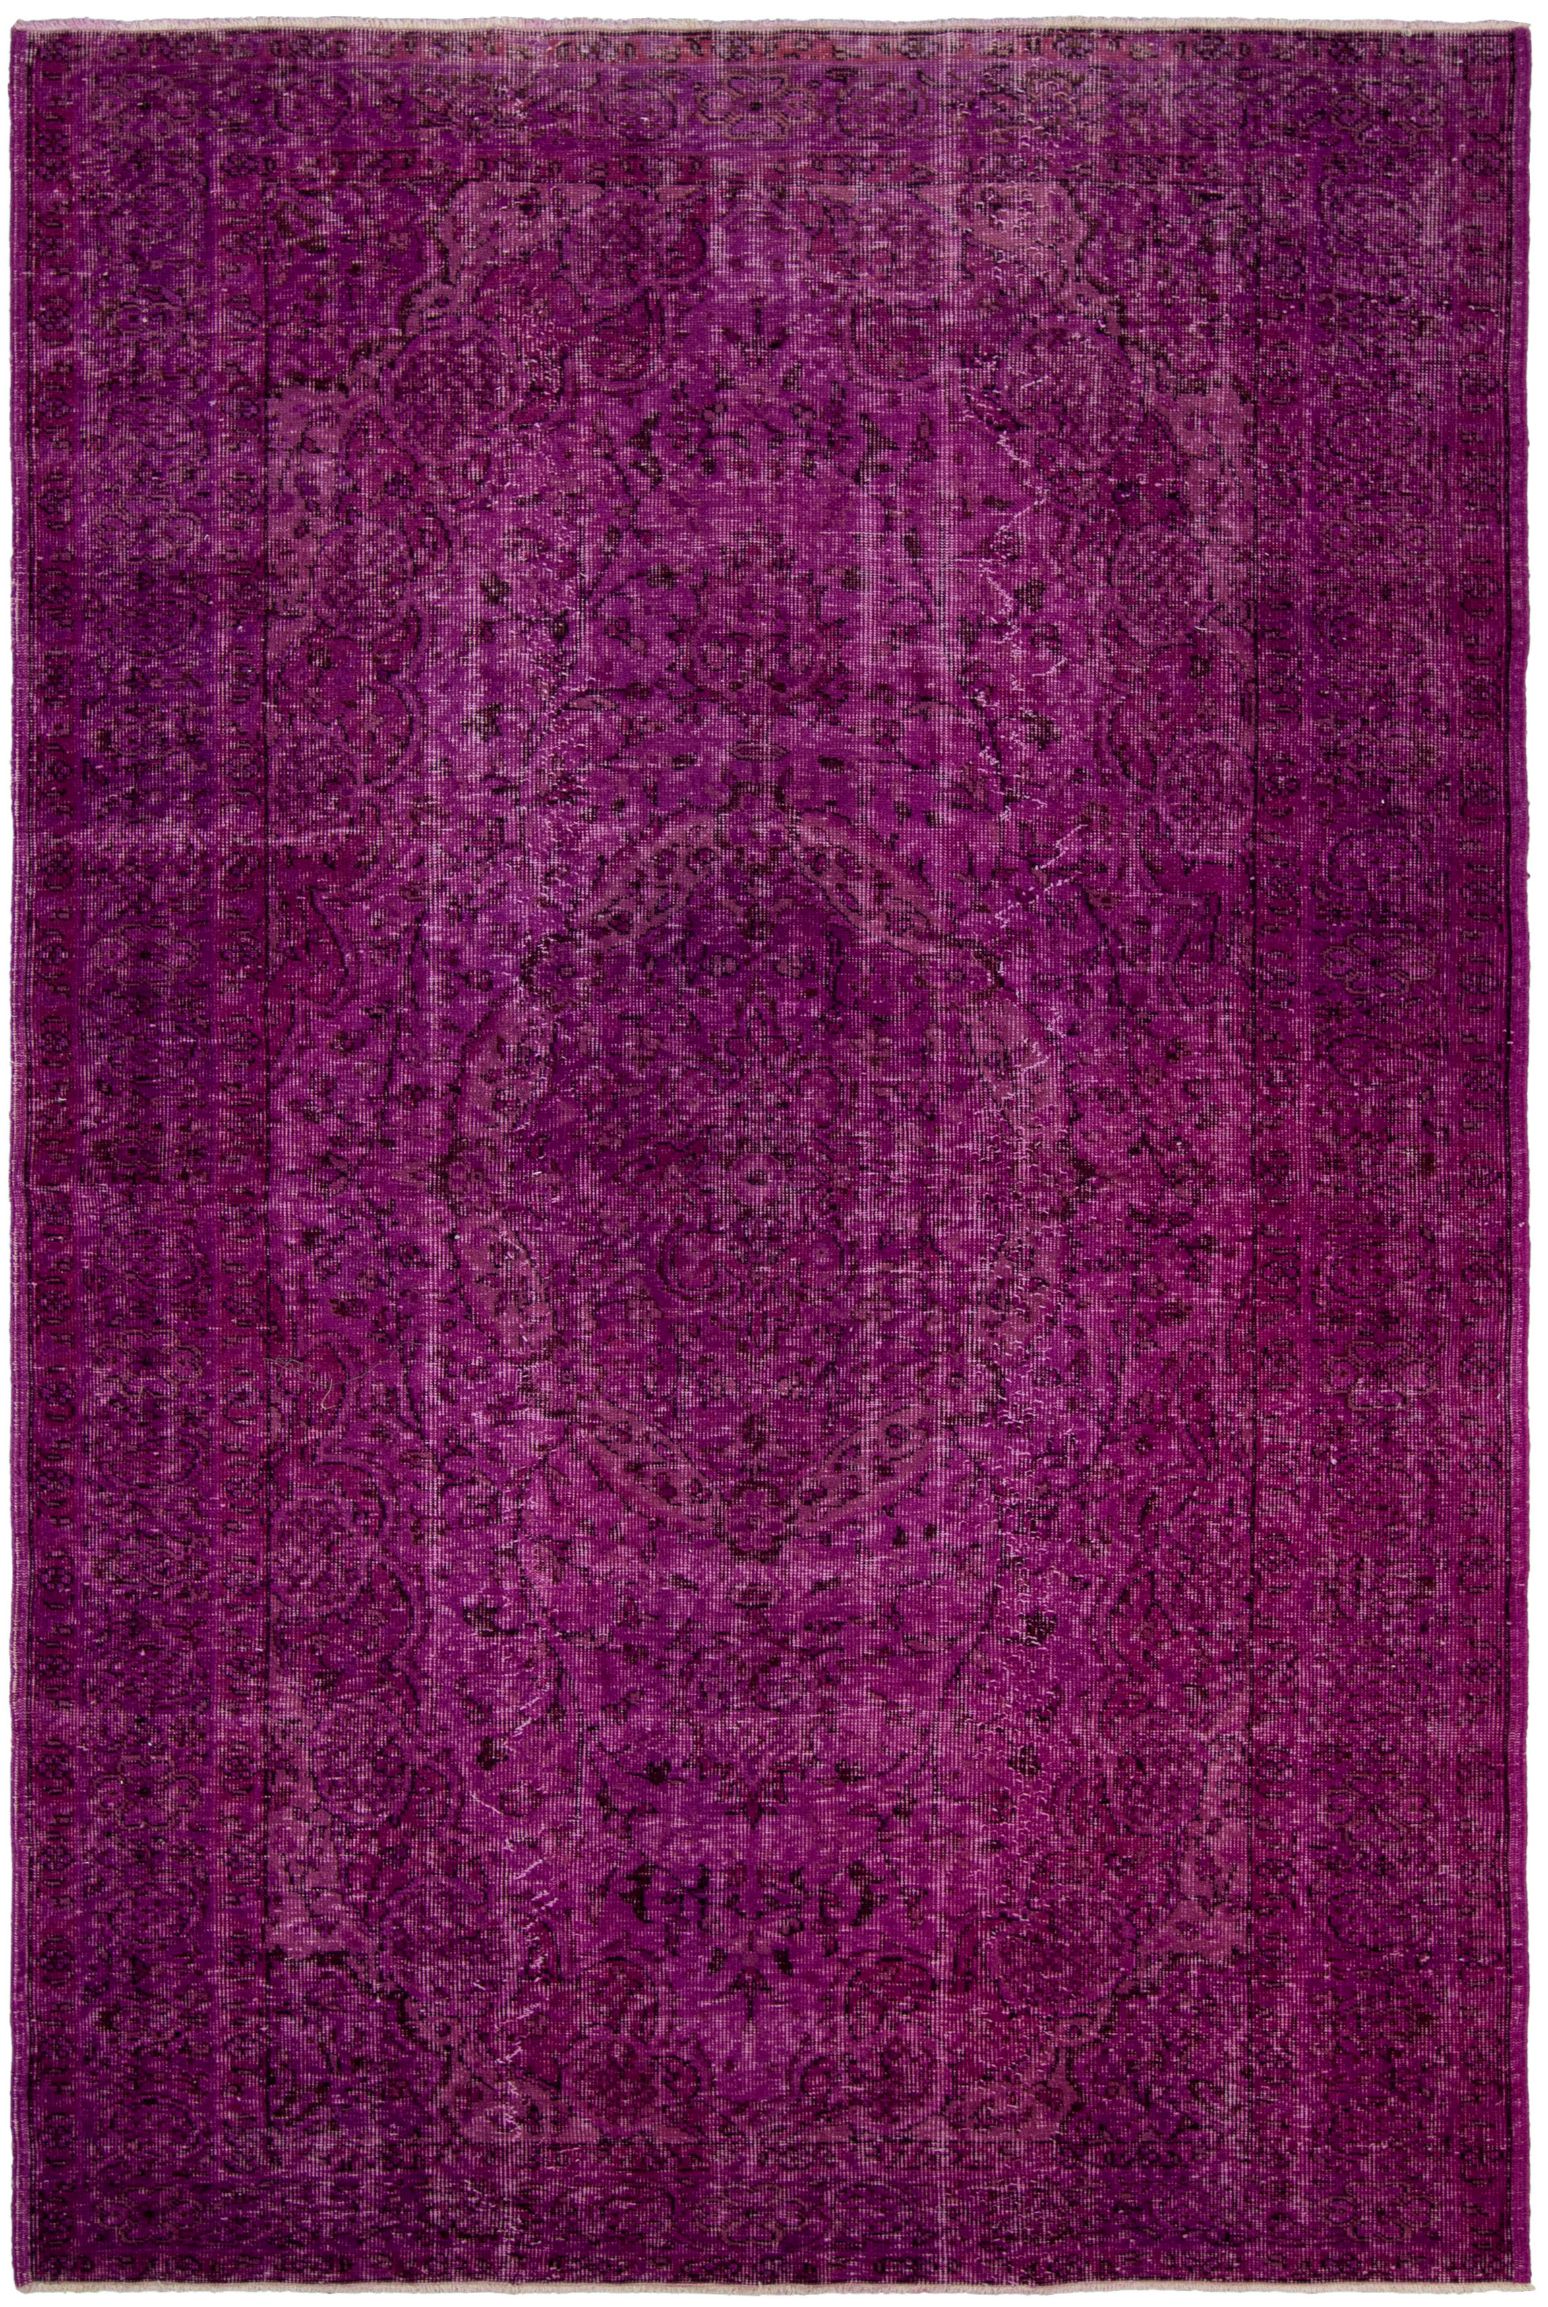 Hand-knotted Color Transition Indigo Wool Rug 6'4" x 9'7" Size: 6'4" x 9'7"  